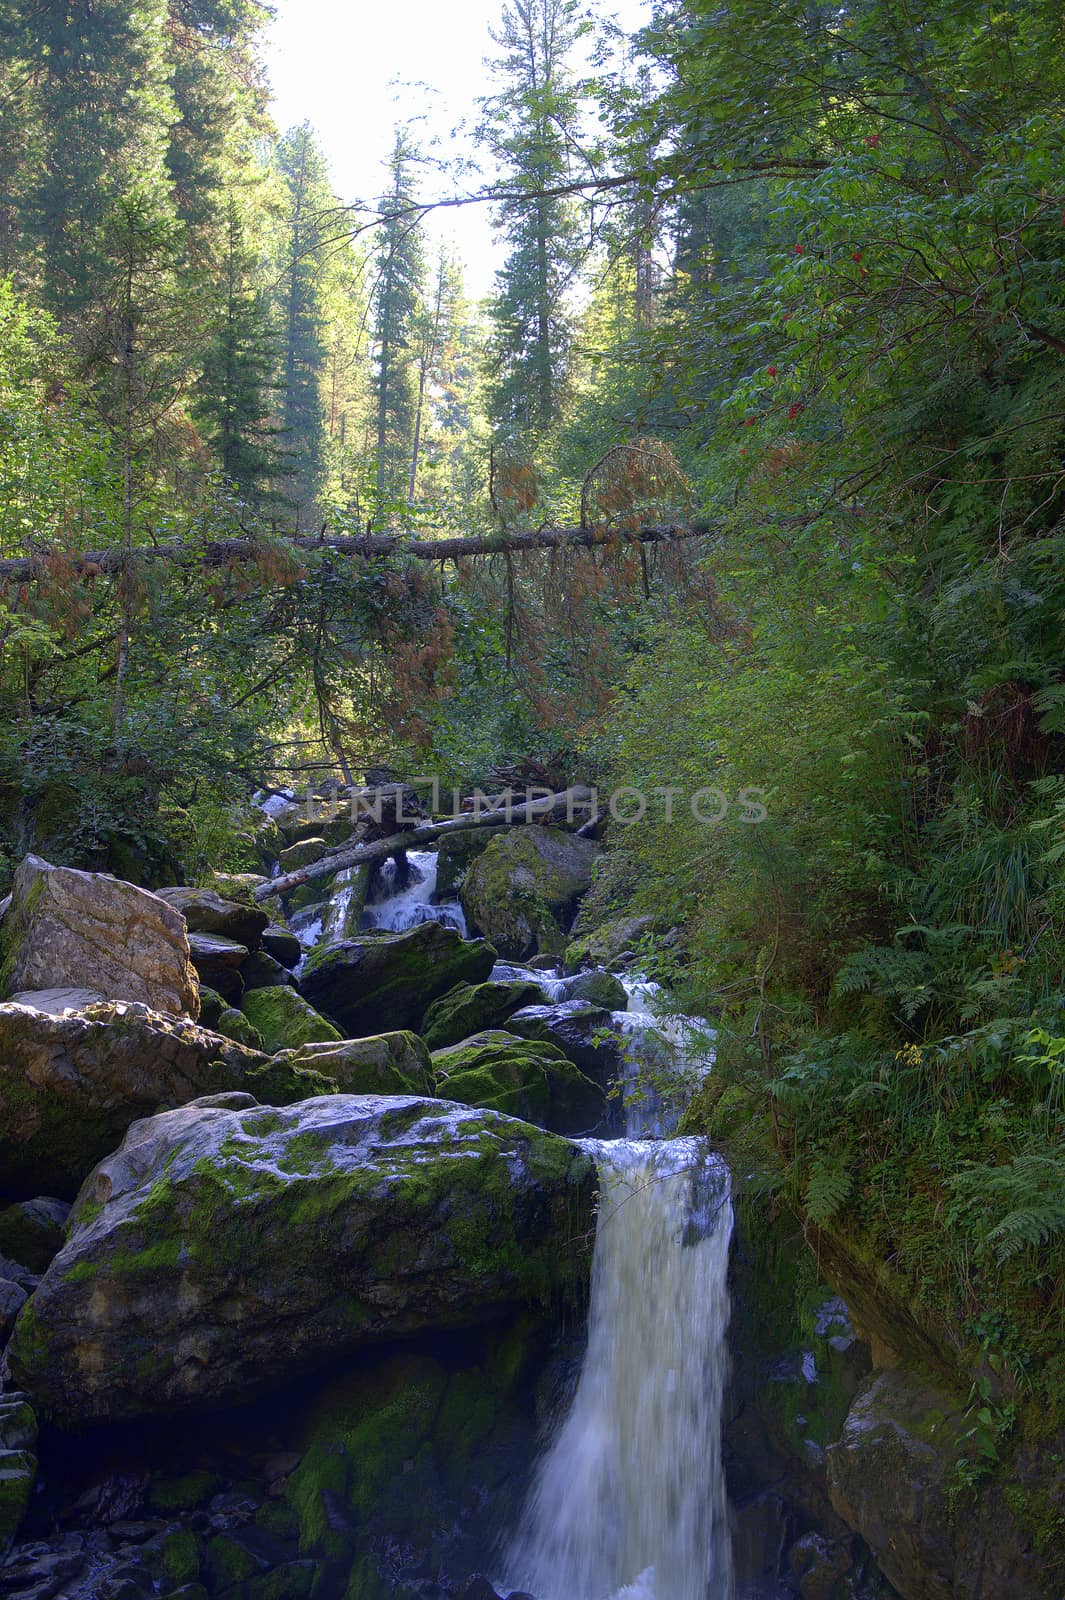 Mountain river flowing into a small waterfall on rocky shores. Altai, Siberia, Russia.